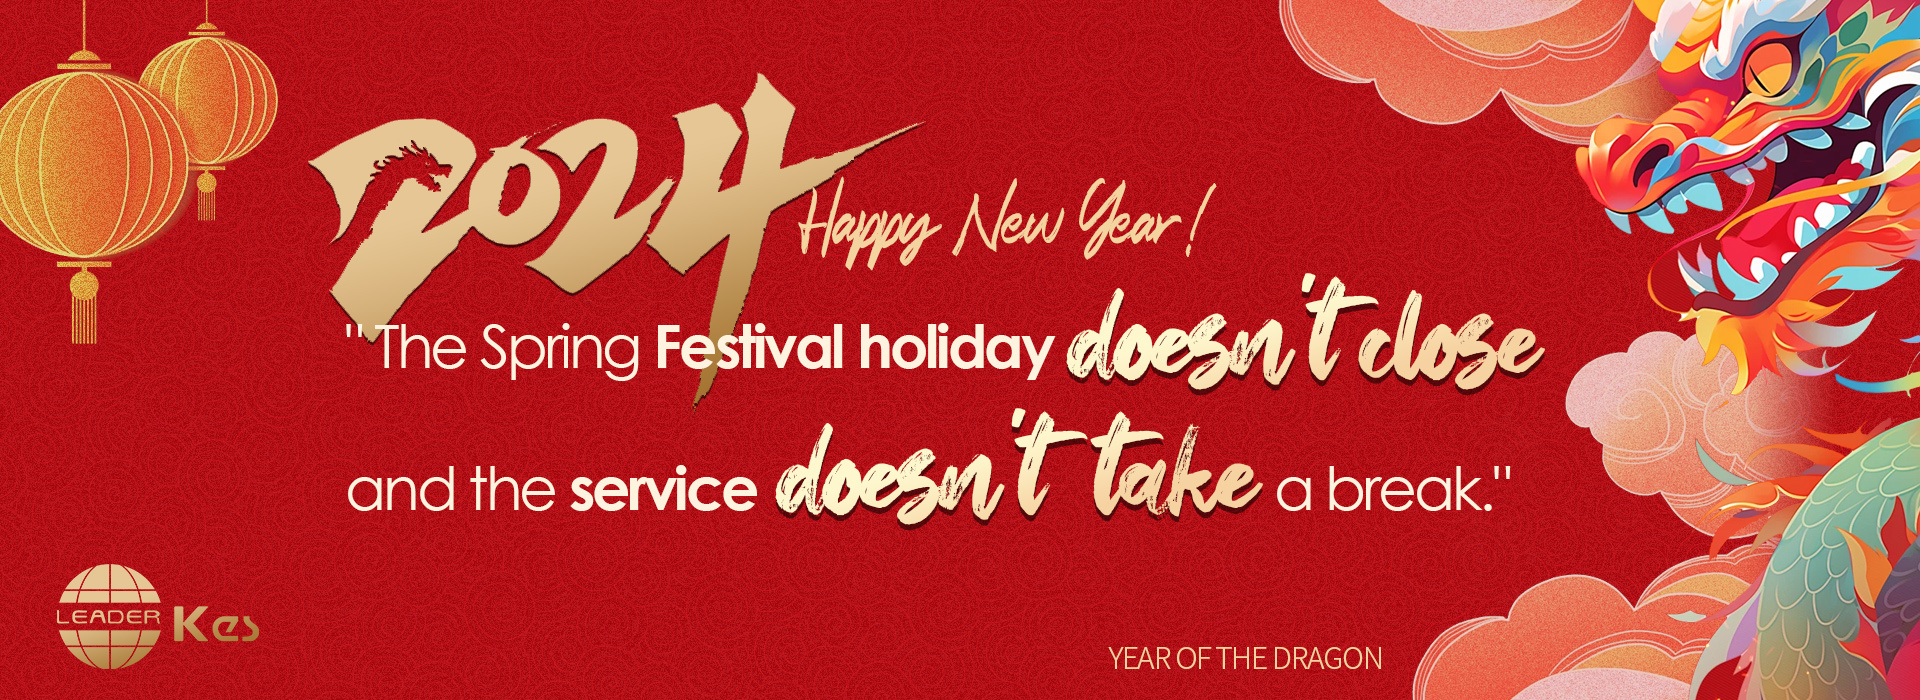 KES wishes you a Happy New Year and we are still here to serve you during the Chinese New Year.